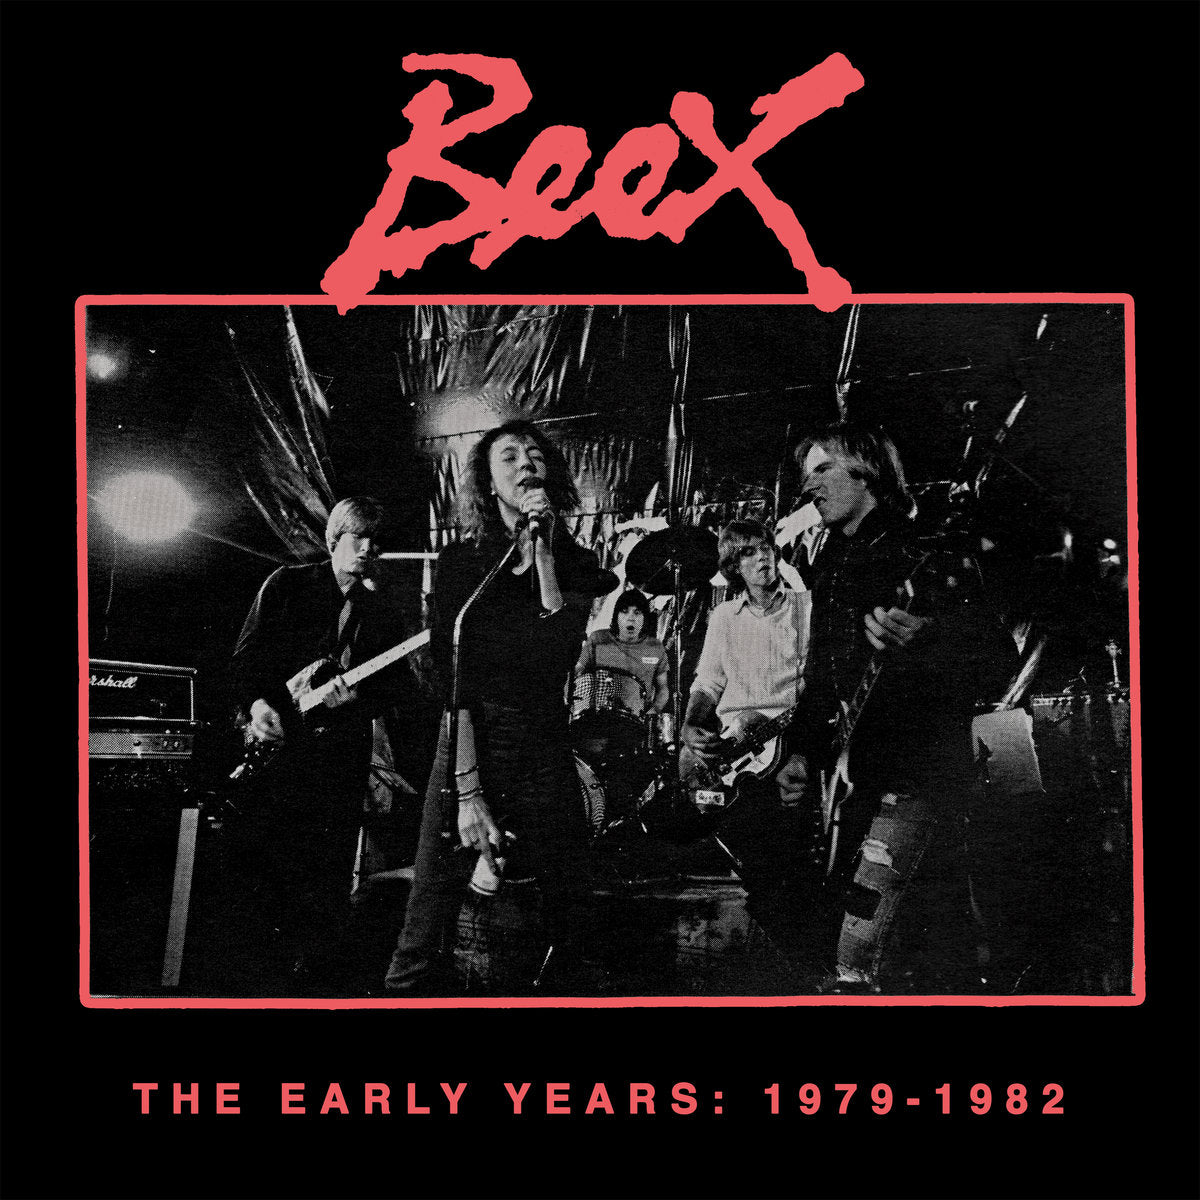 BEEX - THE EARLY YEARS: 1979-1982 Vinyl LP